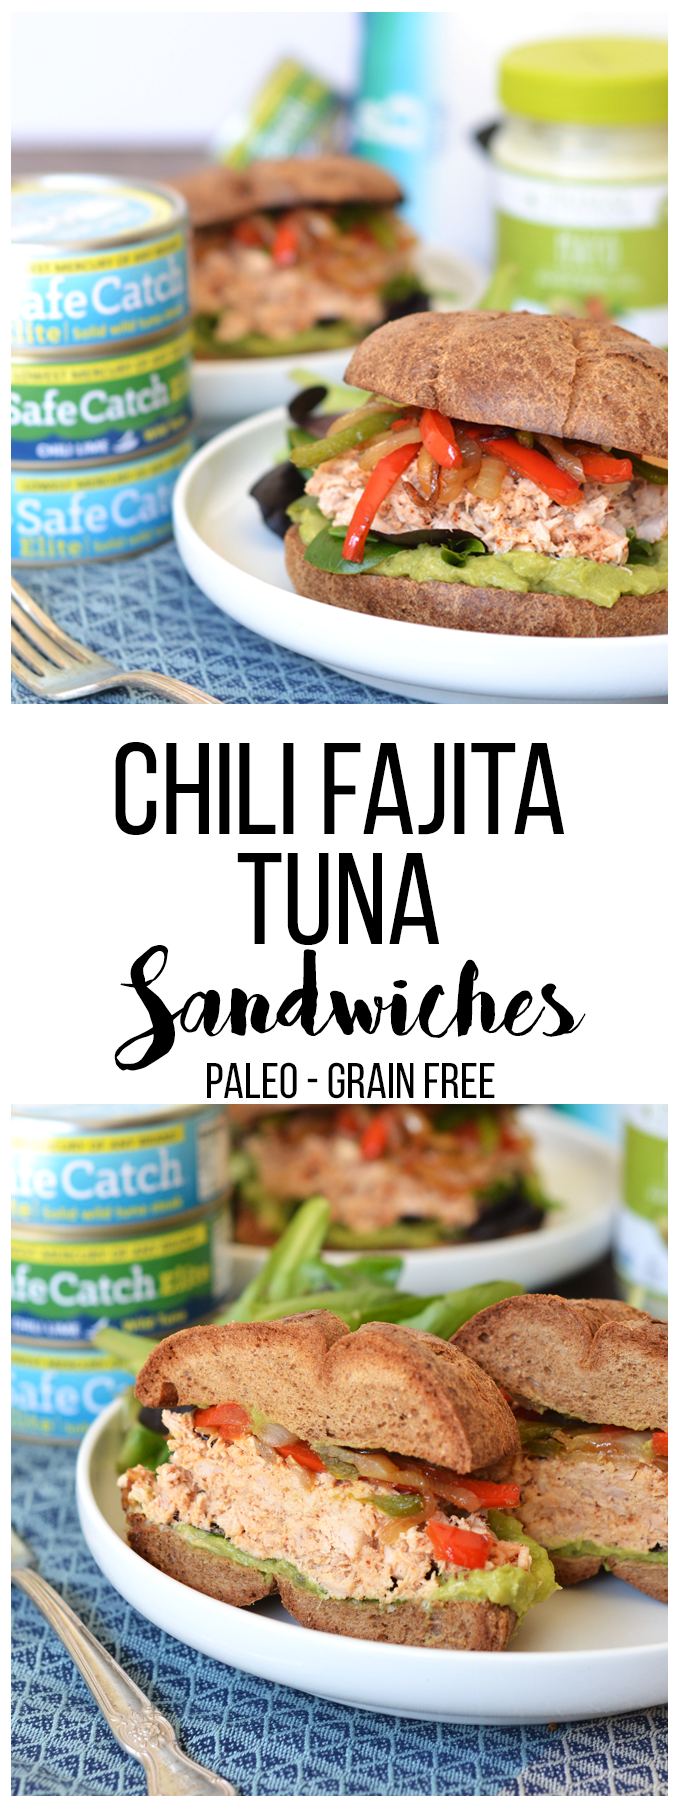 These Chili Fajita Tuna Sandwiches are an easy and paleo meal that is bursting with flavor!